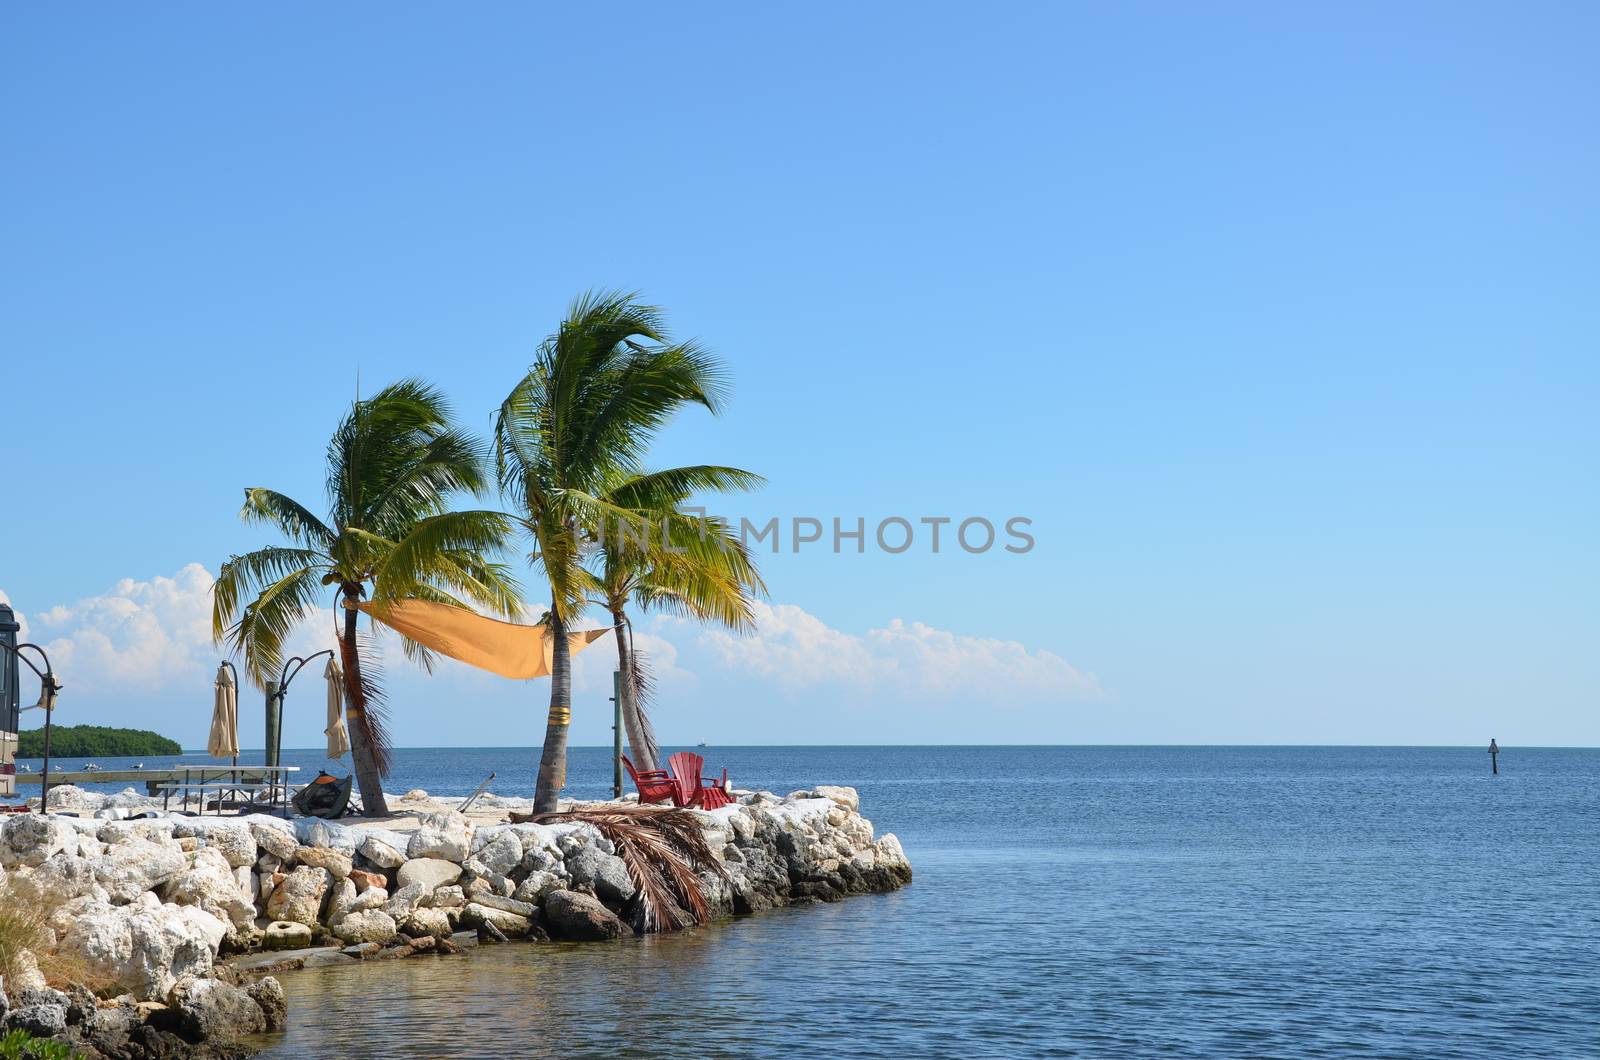 A quiet place to sit and enjoy the ocean in the florida keys. Two charis and a few palm trees complete the scene.